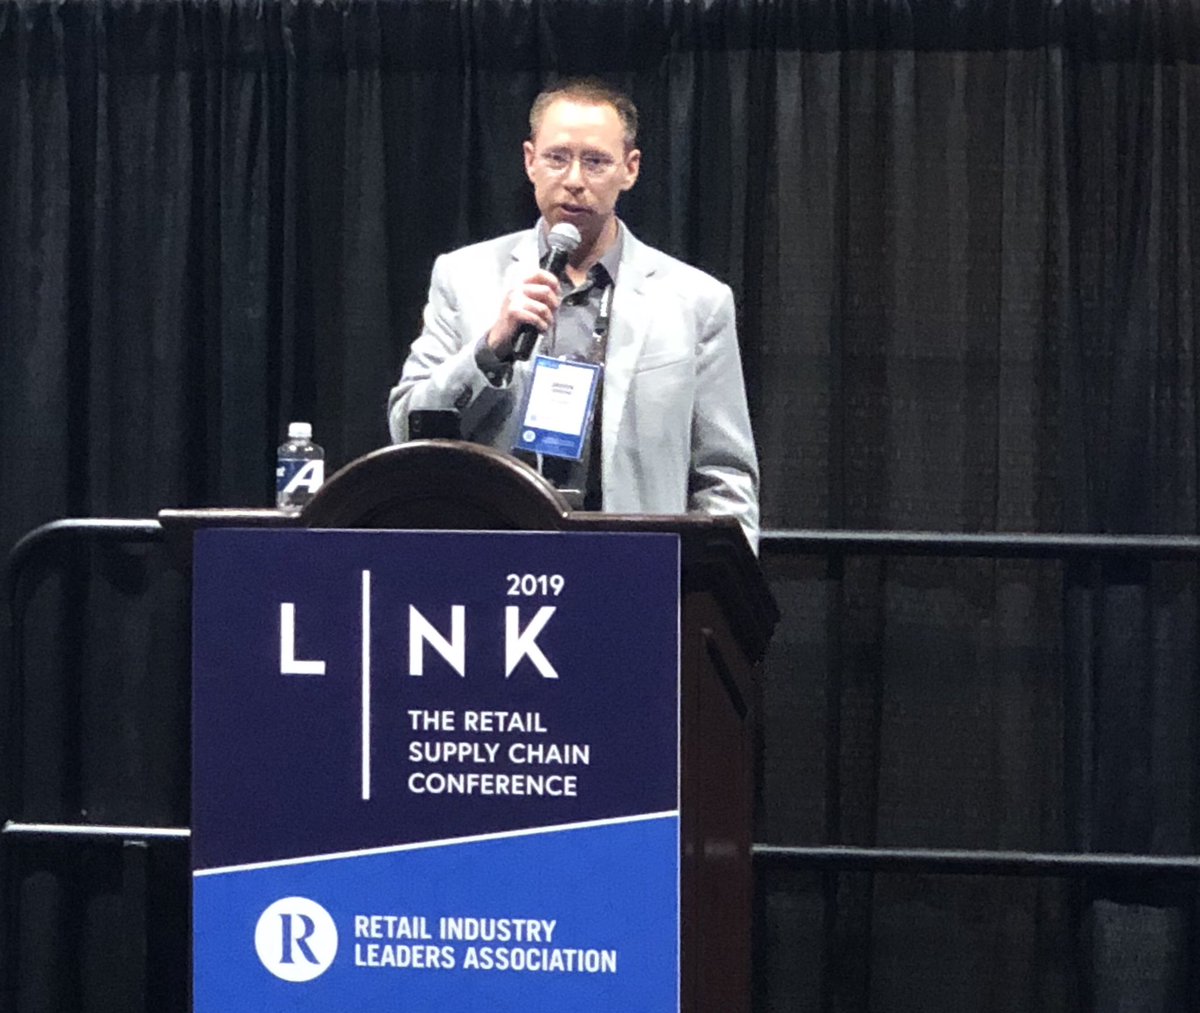 Day 2 of @RILAtweets #LINK2019! 

Co-Founder Jason Rosing hits the #RILAlink stage to give his pitch on Veridian’s recent innovations 💡